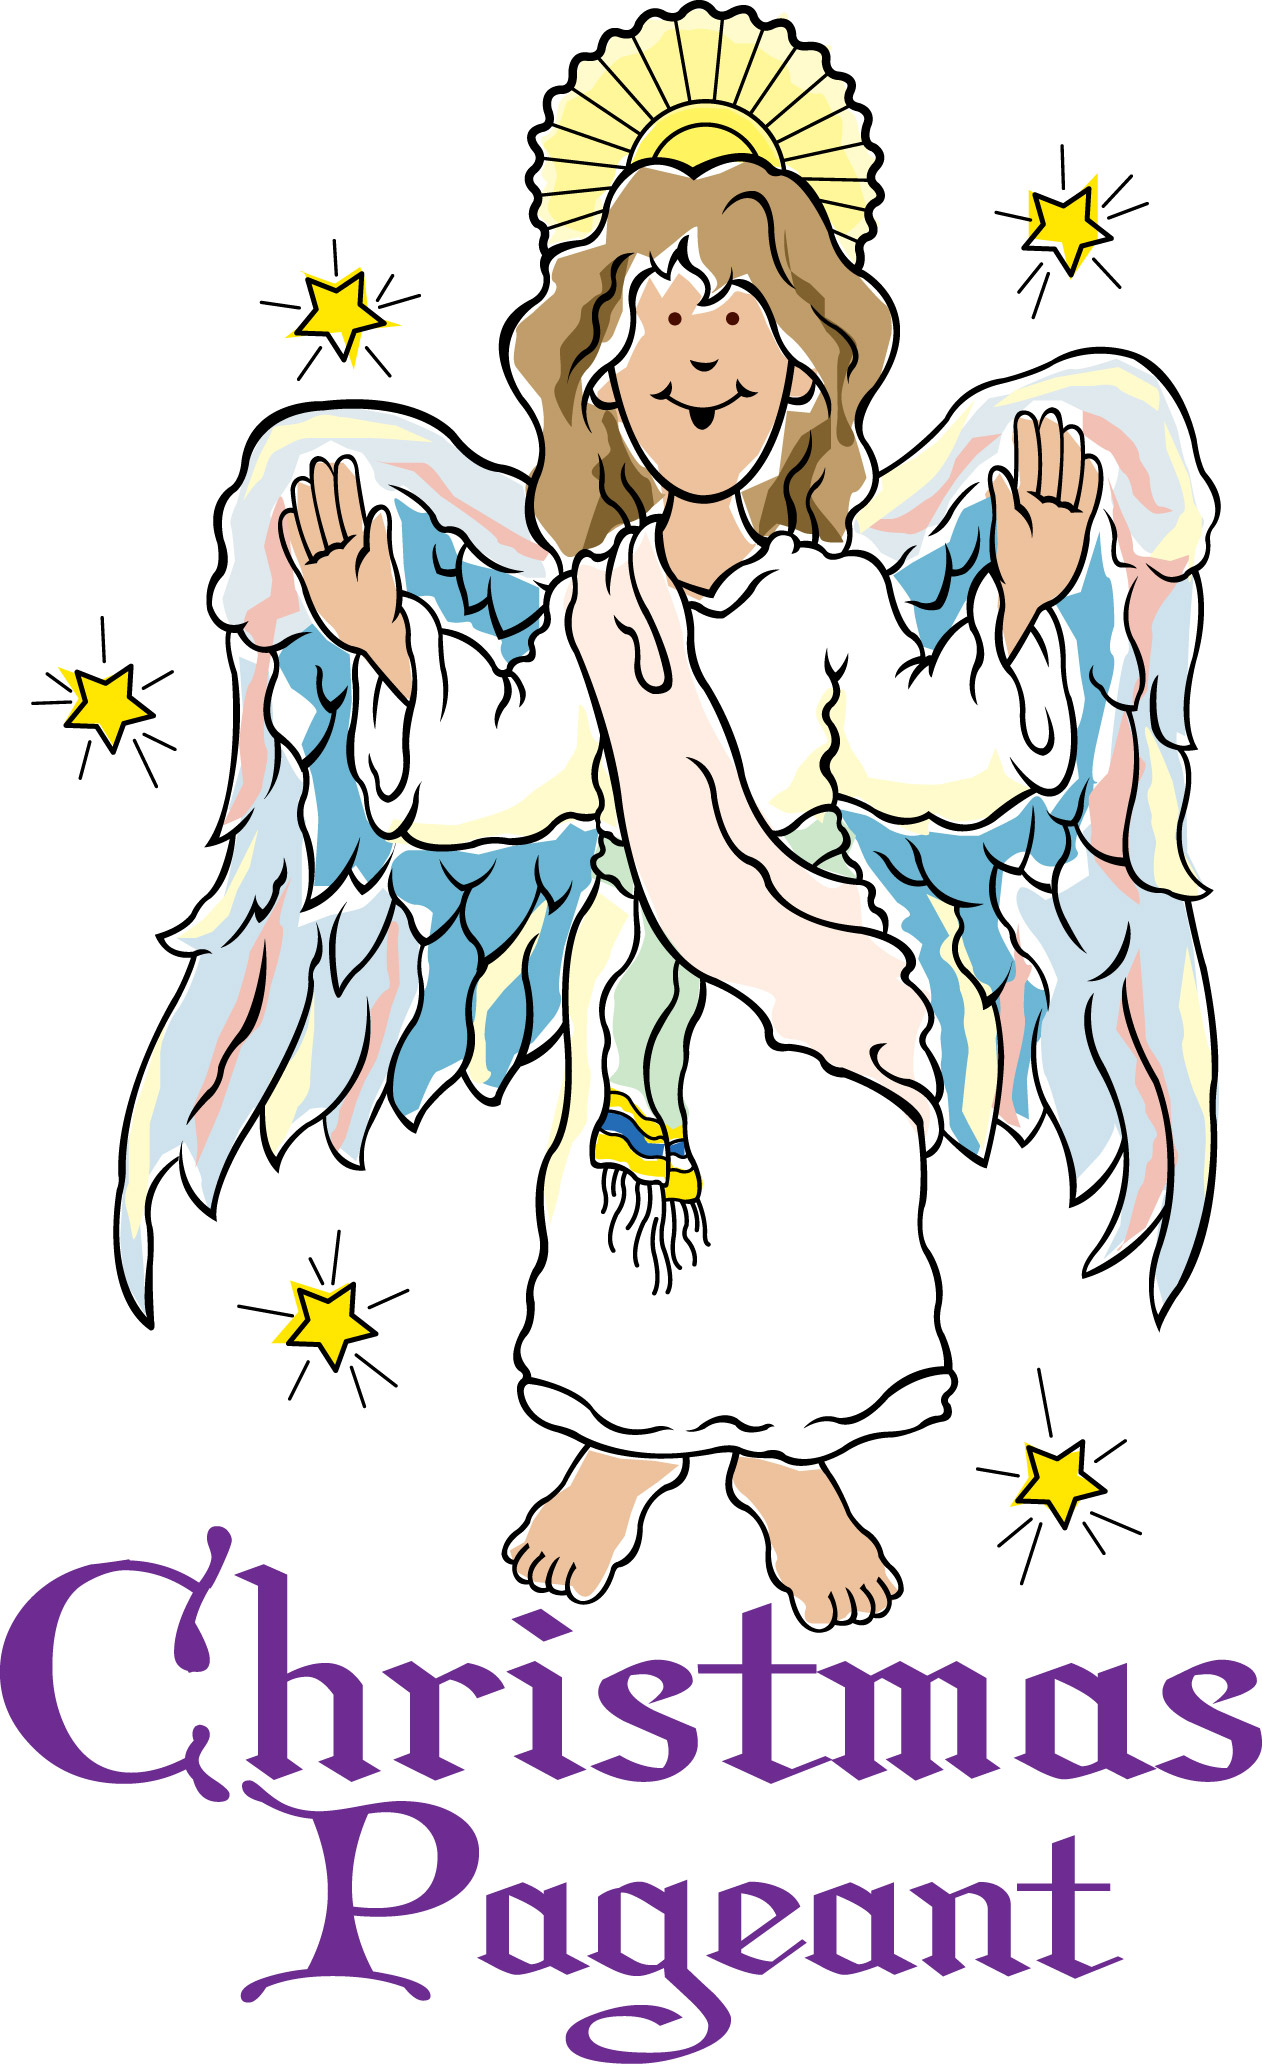 free clipart christmas pageant - photo #17